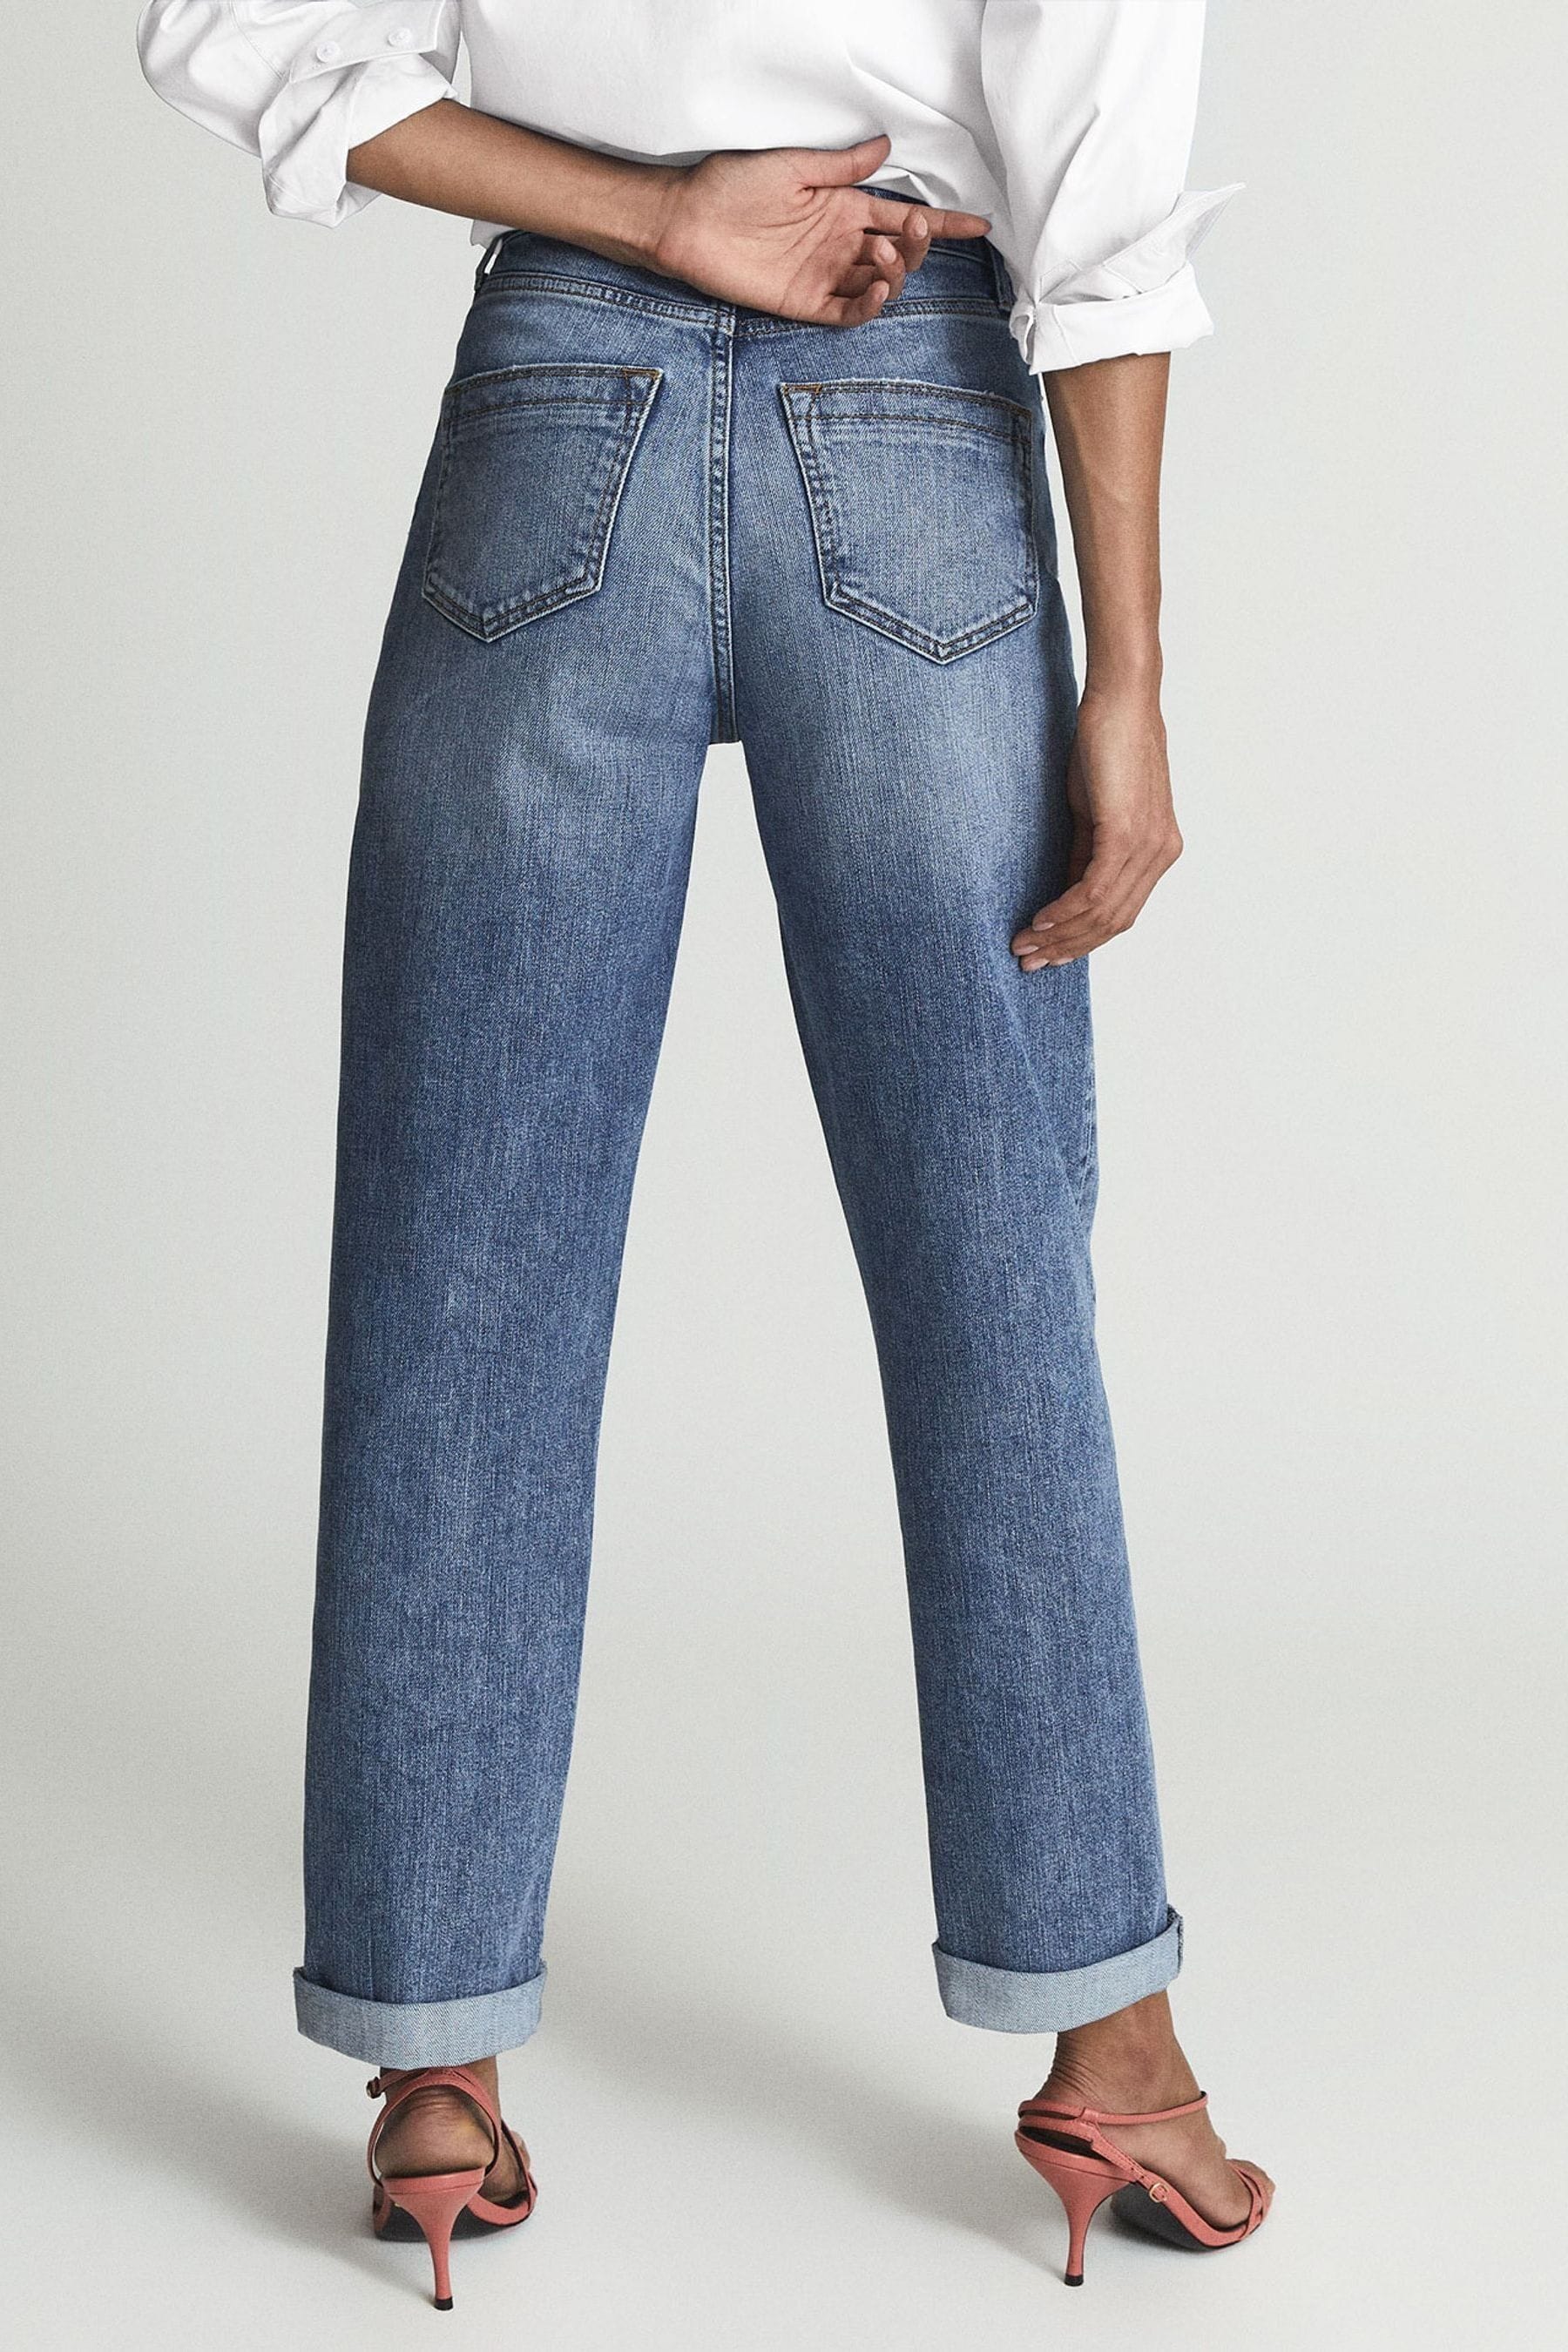 Buy Reiss Bay Slim Straight Cut Ripped Jeans from Next Ireland